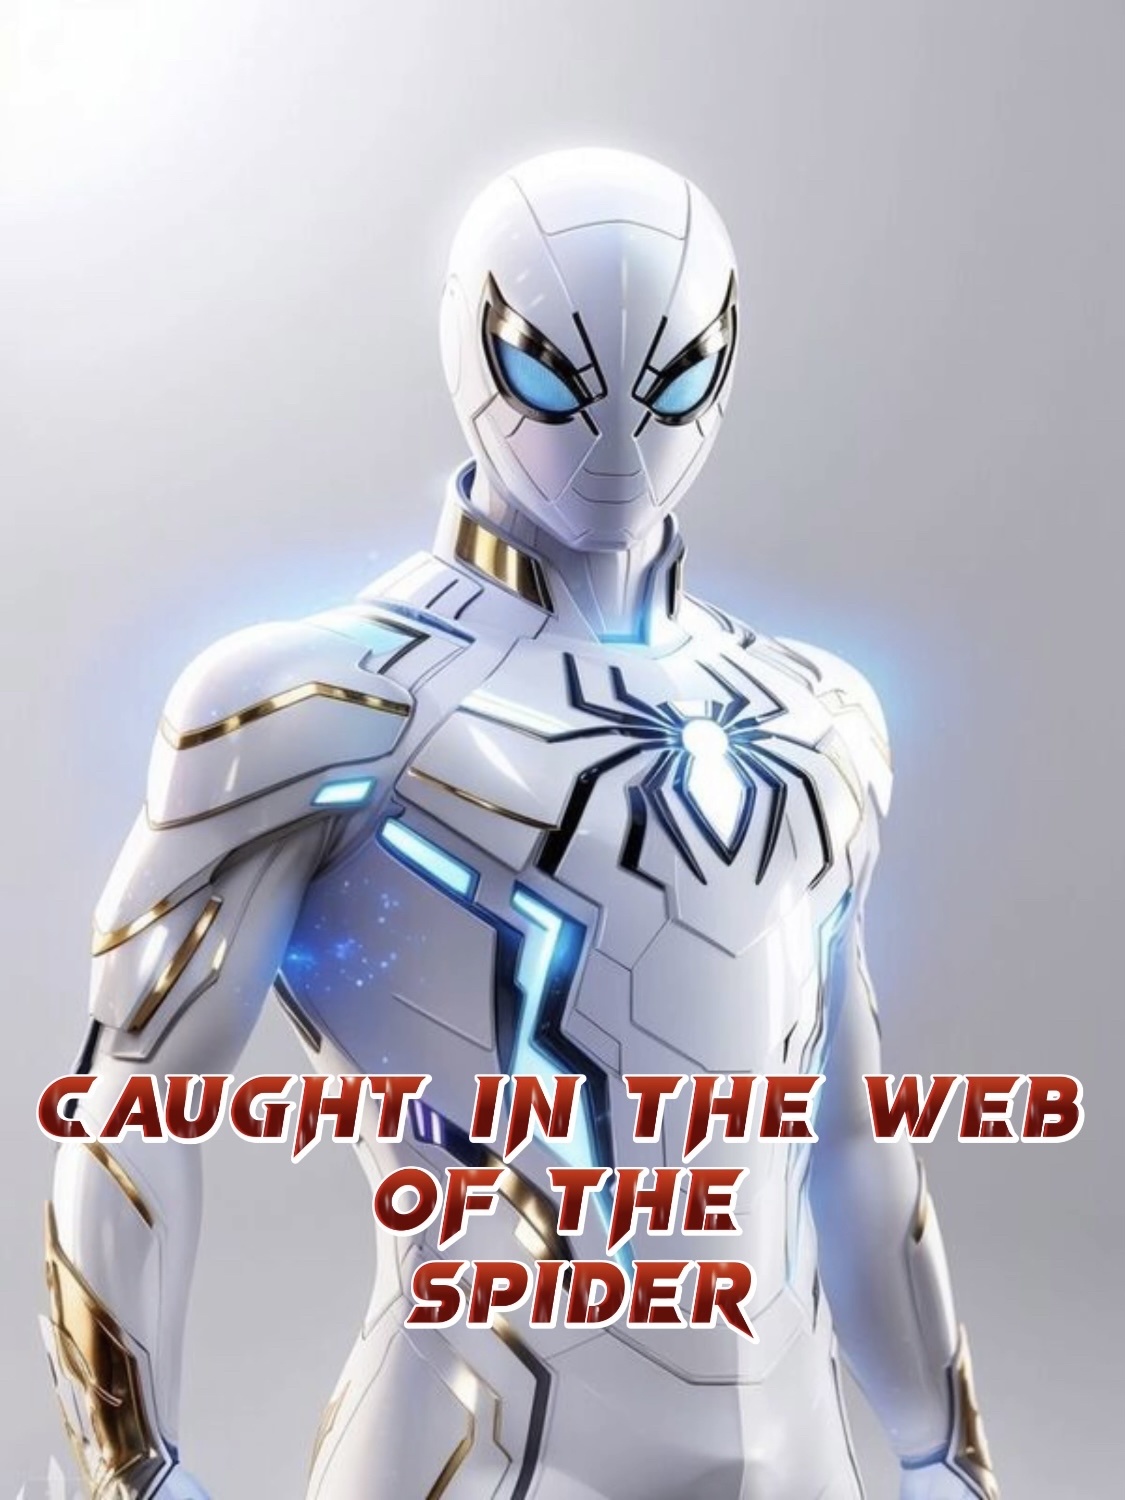 "Caught in the Web of the Spider."